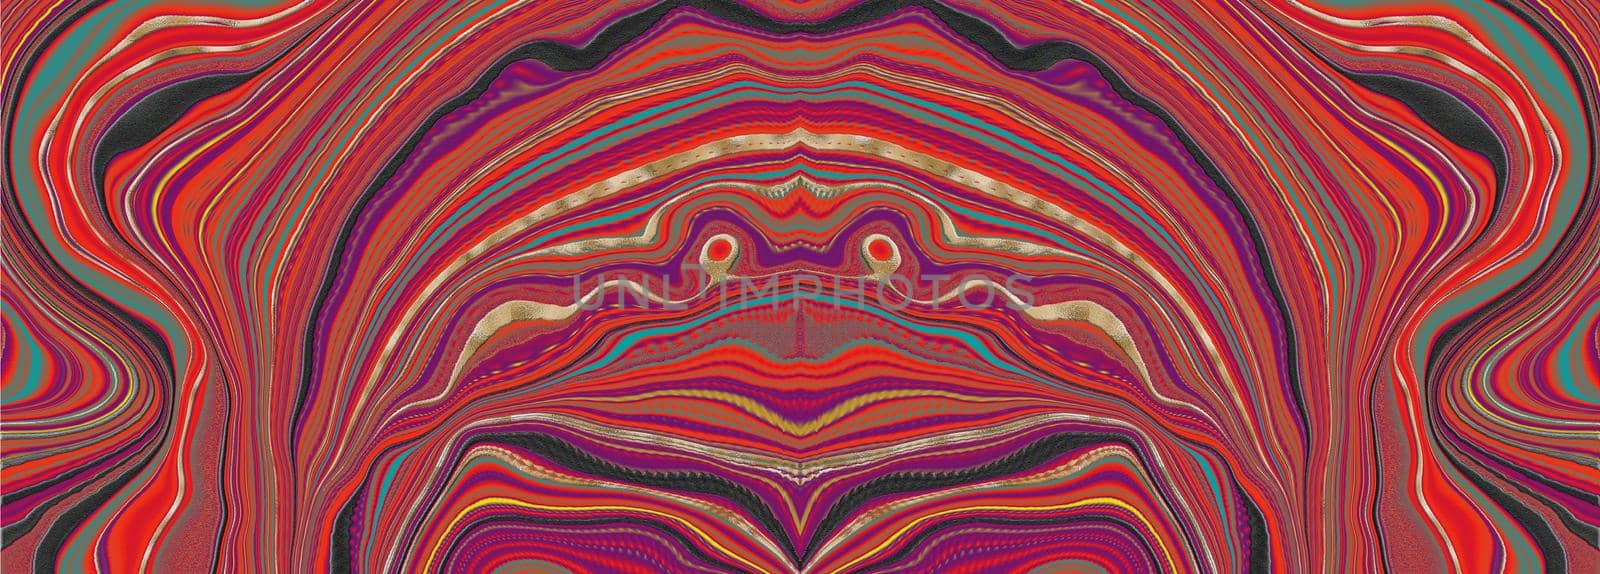 abstract material textile texture. Liquid dynamic red gradient waves. Digital background with different bright vivid colors in dynamic composition. Fluid texture. Illustration